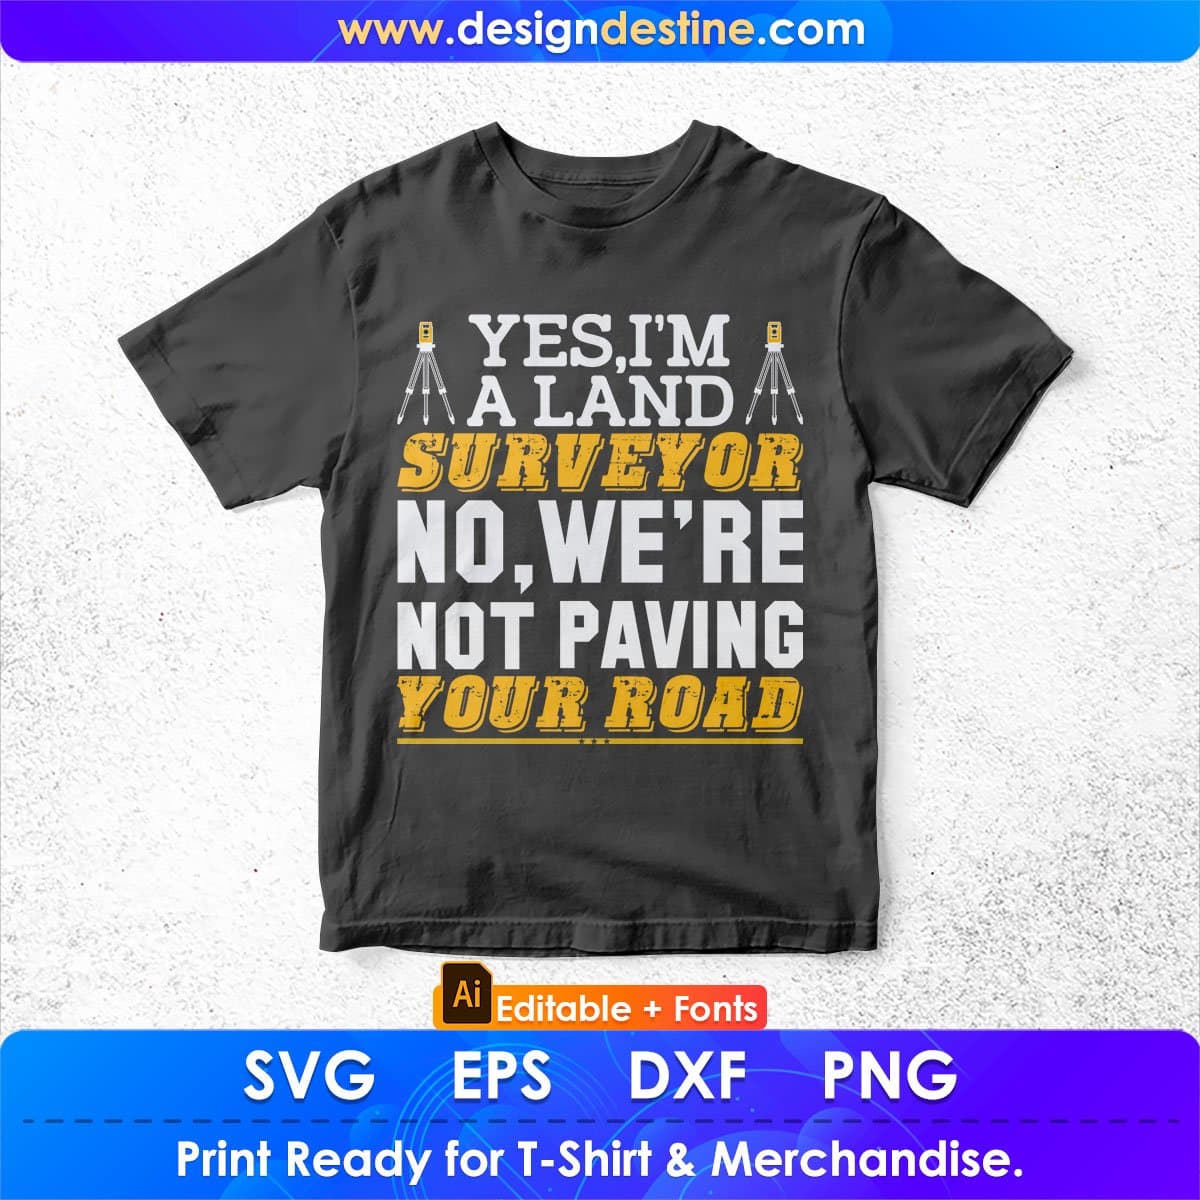 M's This Land Is Your Land T-Shirt